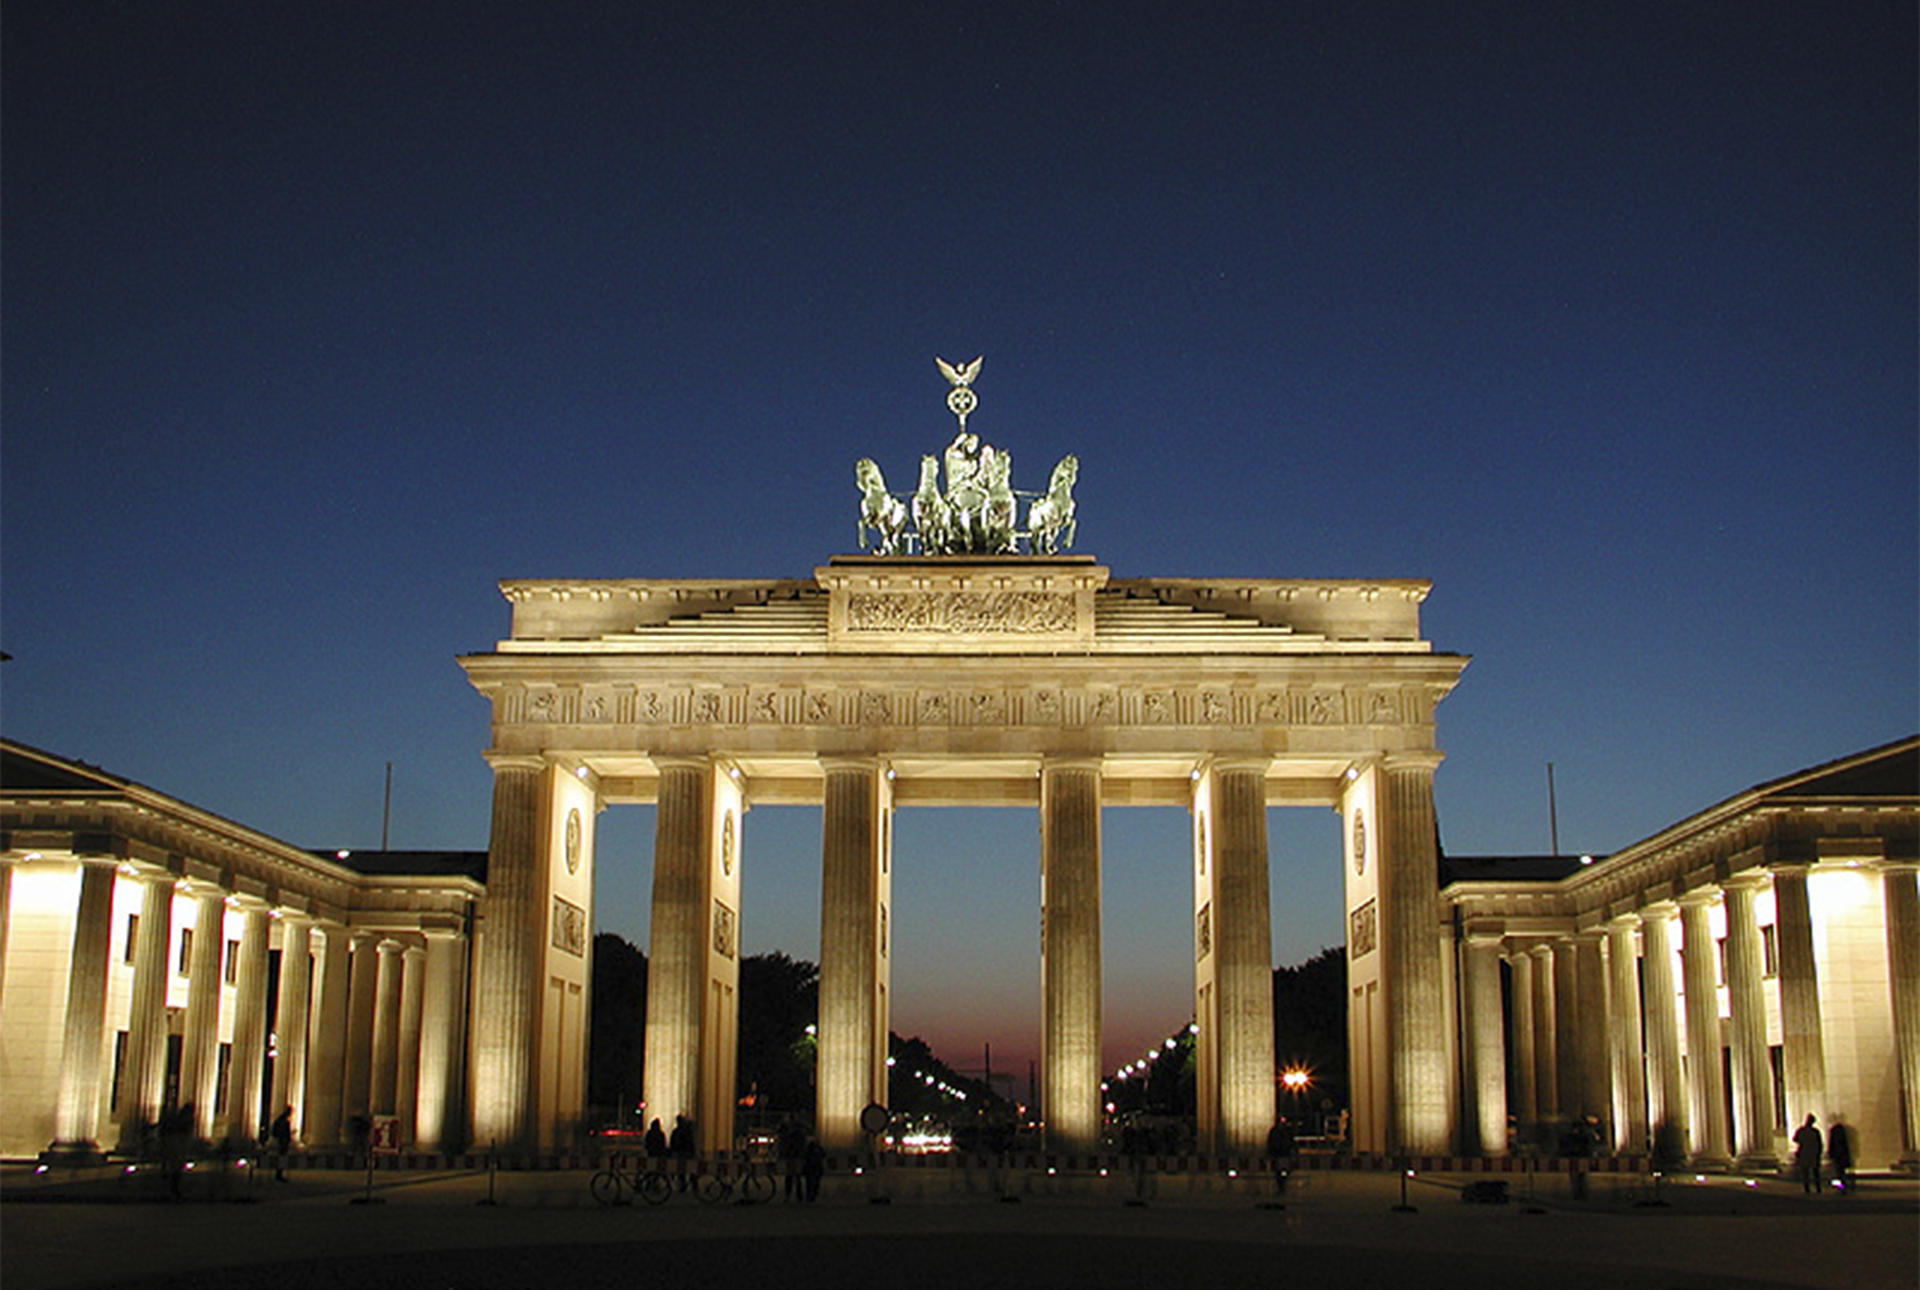 Tall arch with multiple columns lighted at night